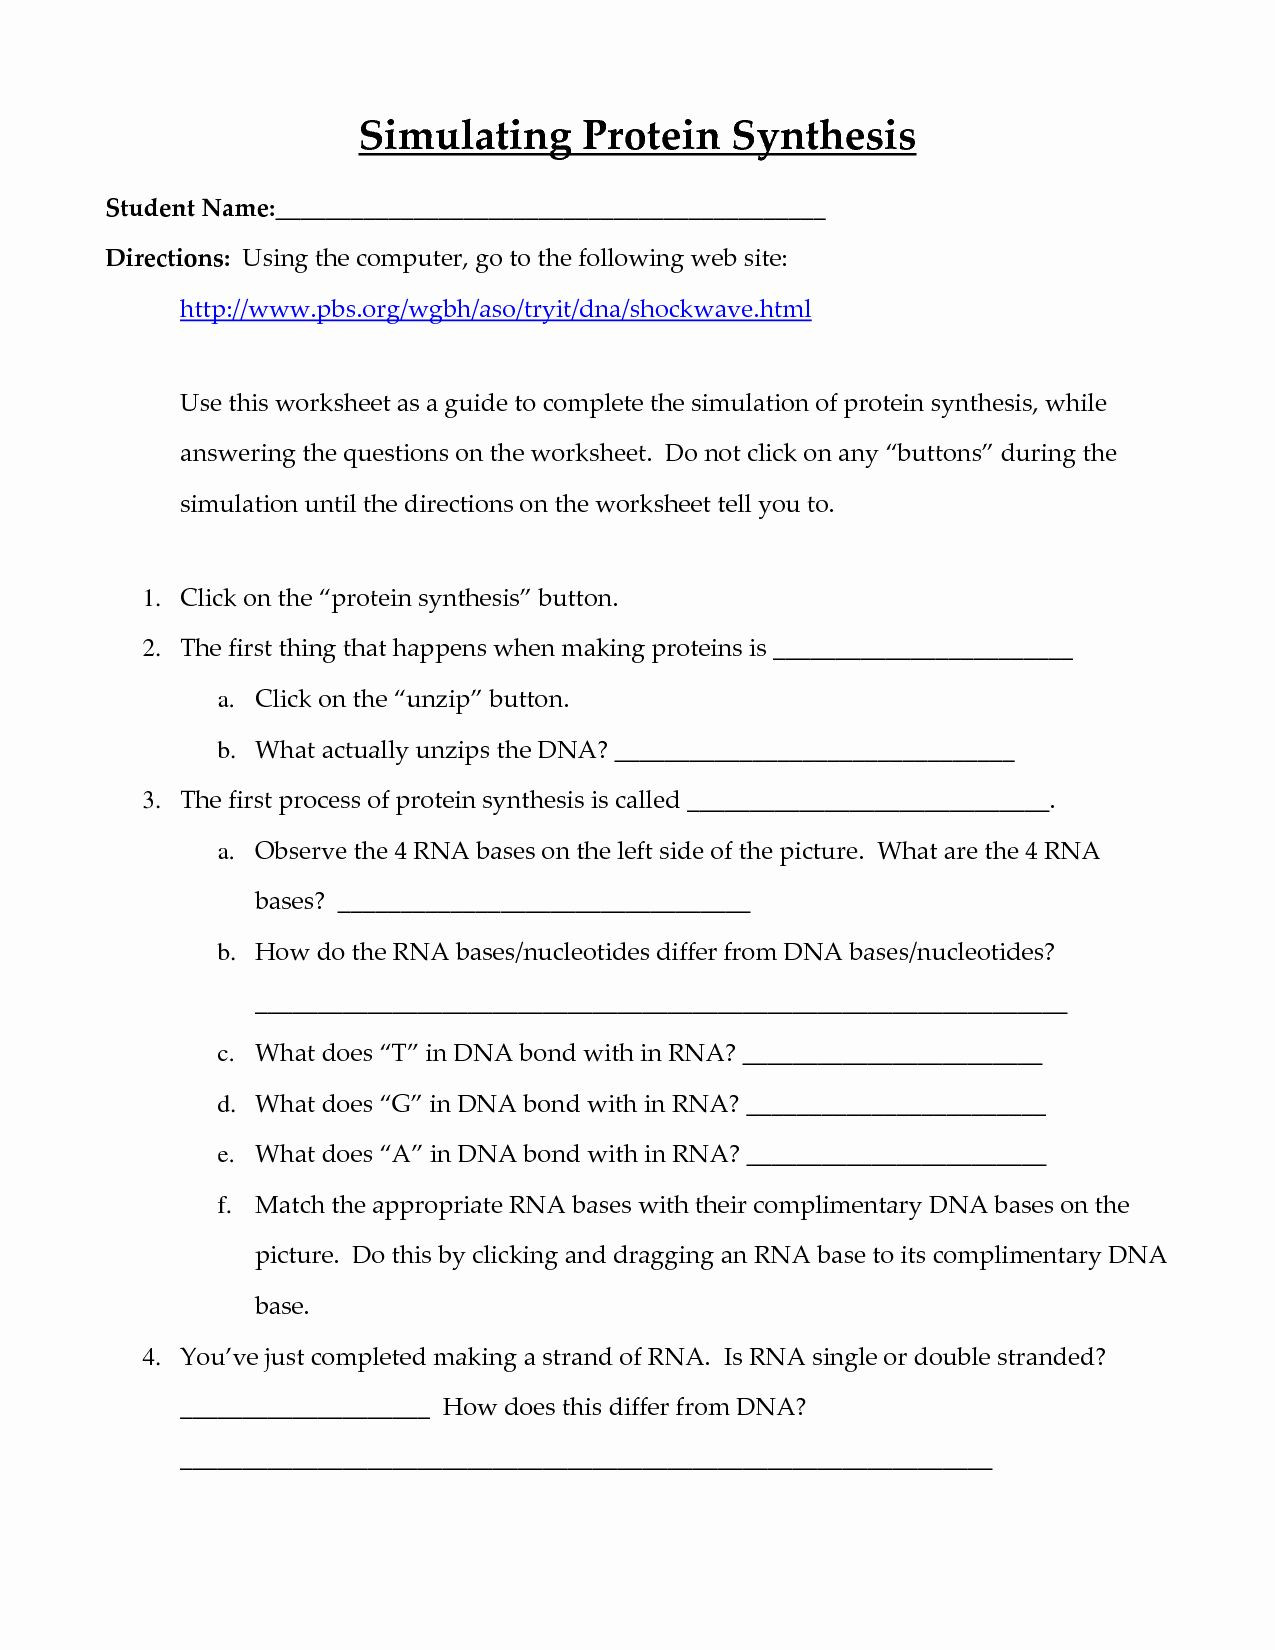 Dna and Rna Worksheet Dna and Rna Worksheet Answers Elegant 16 Best Dna and Rna